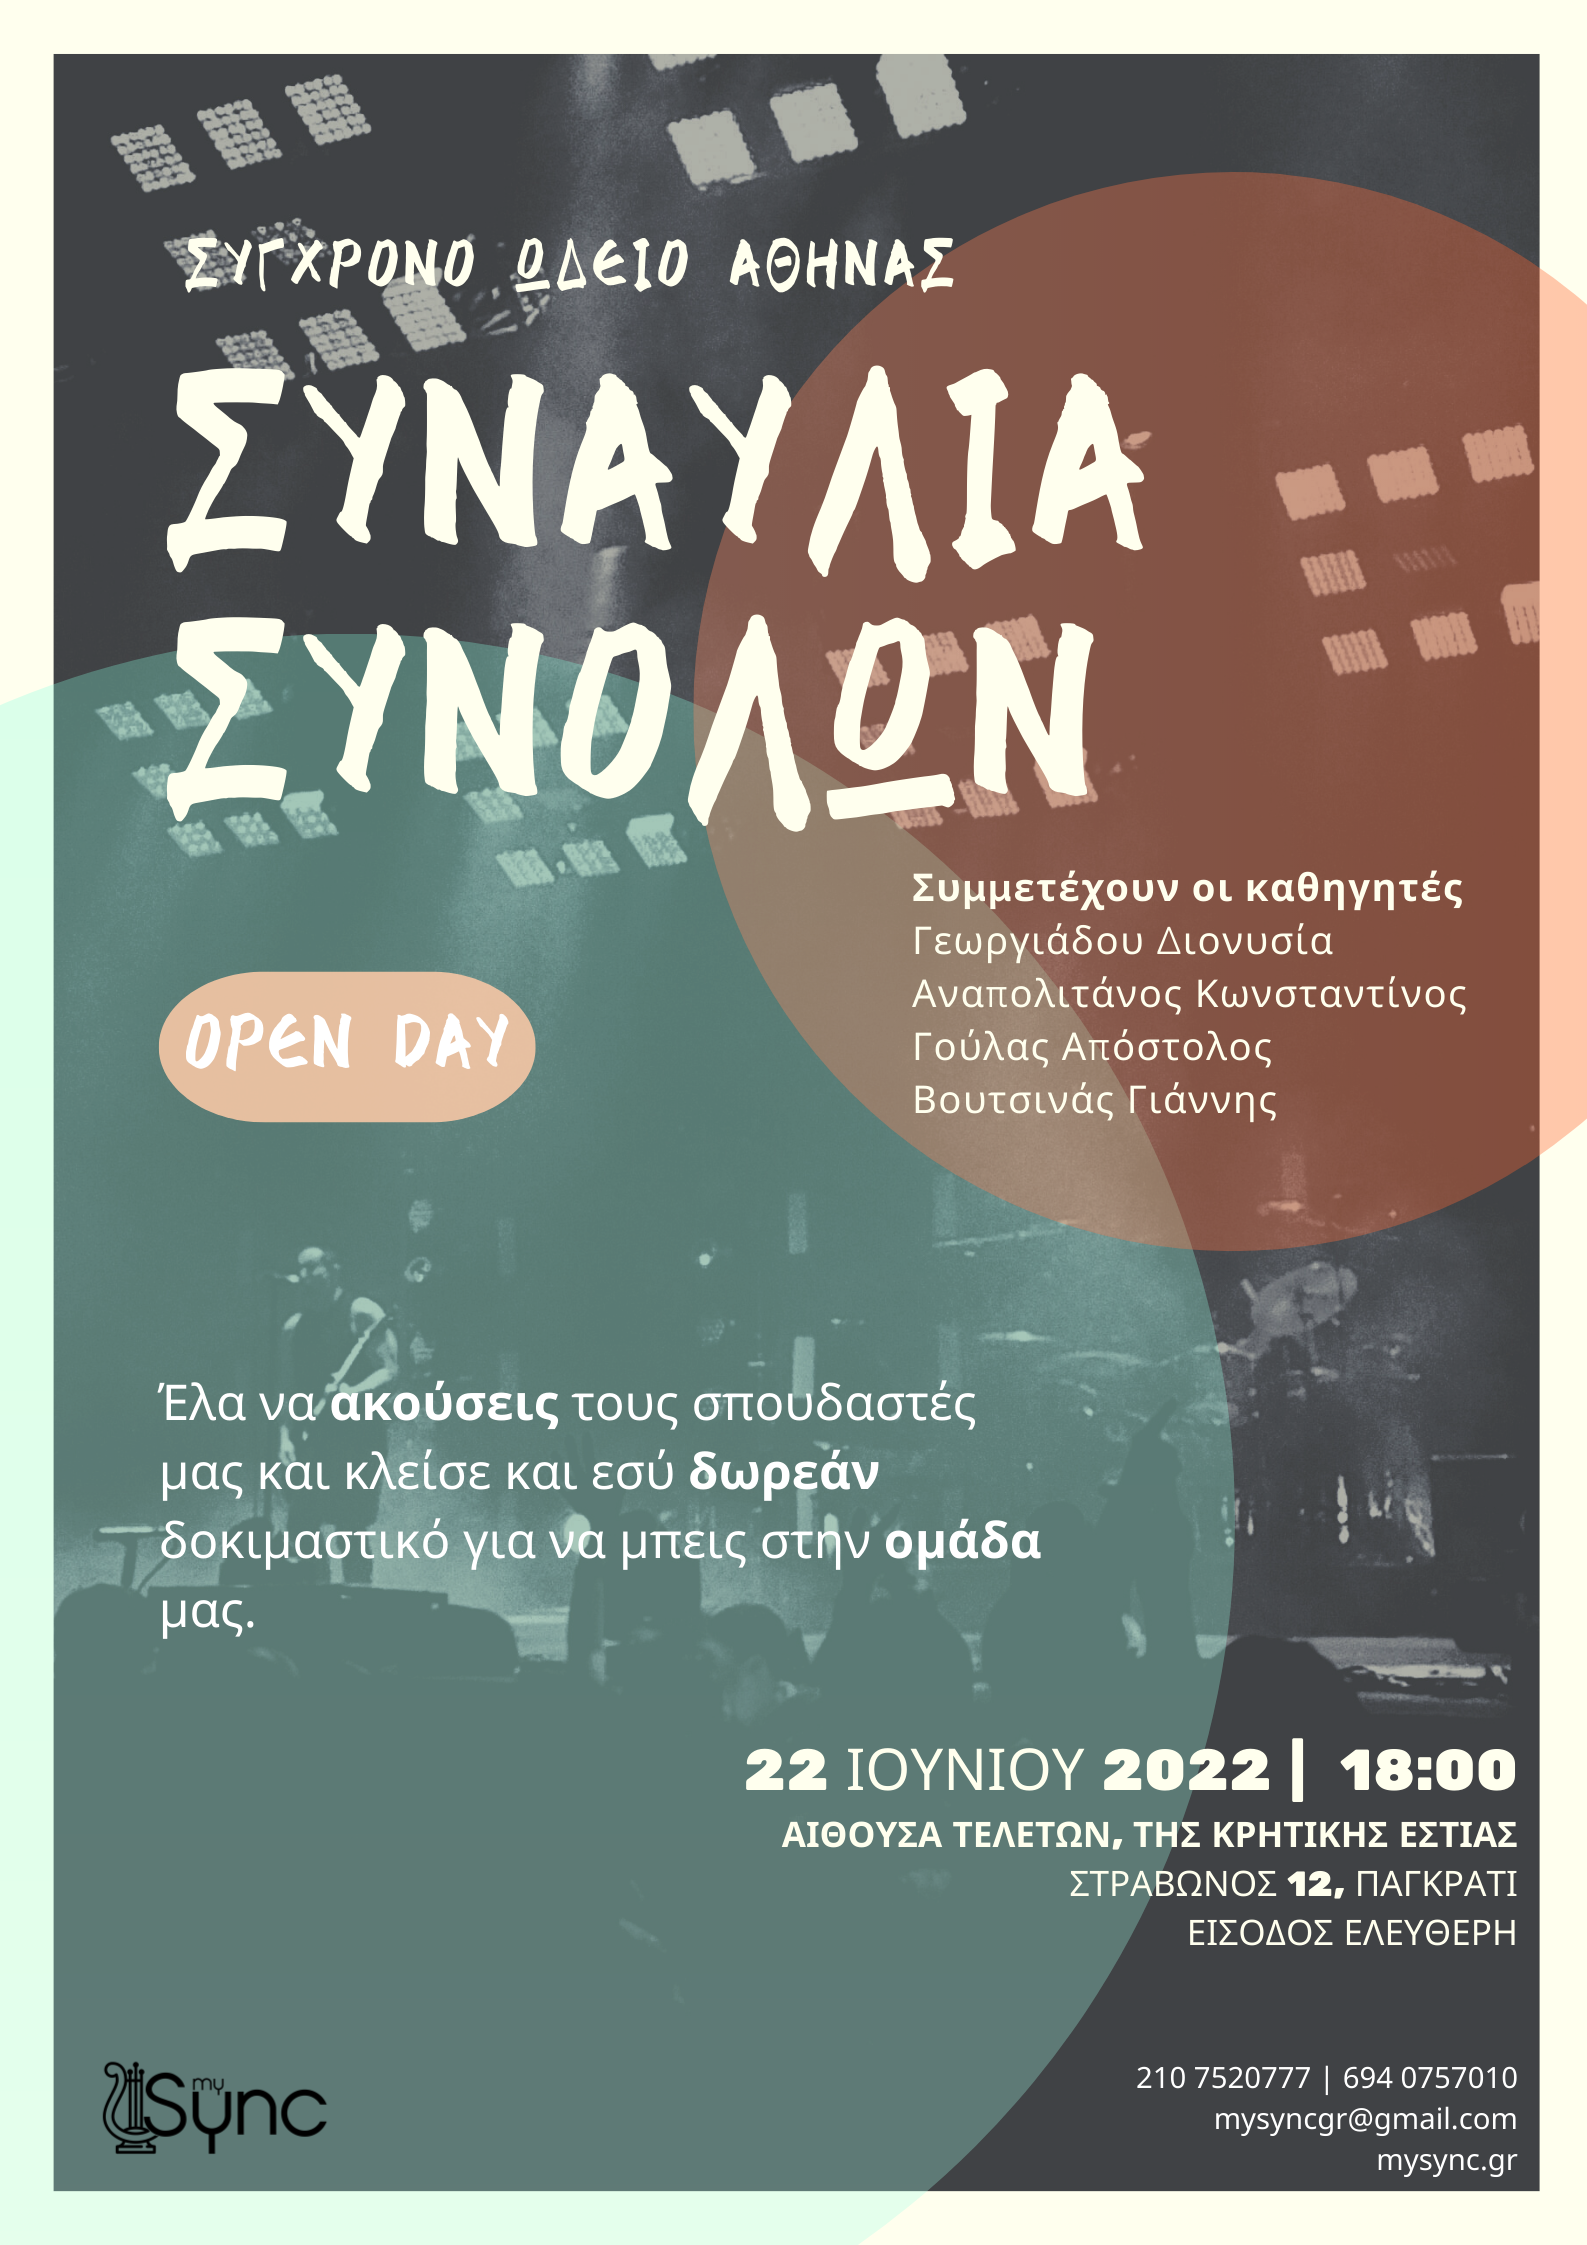 Concert of the Ensembles of the Contemporary Conservatory of Athens